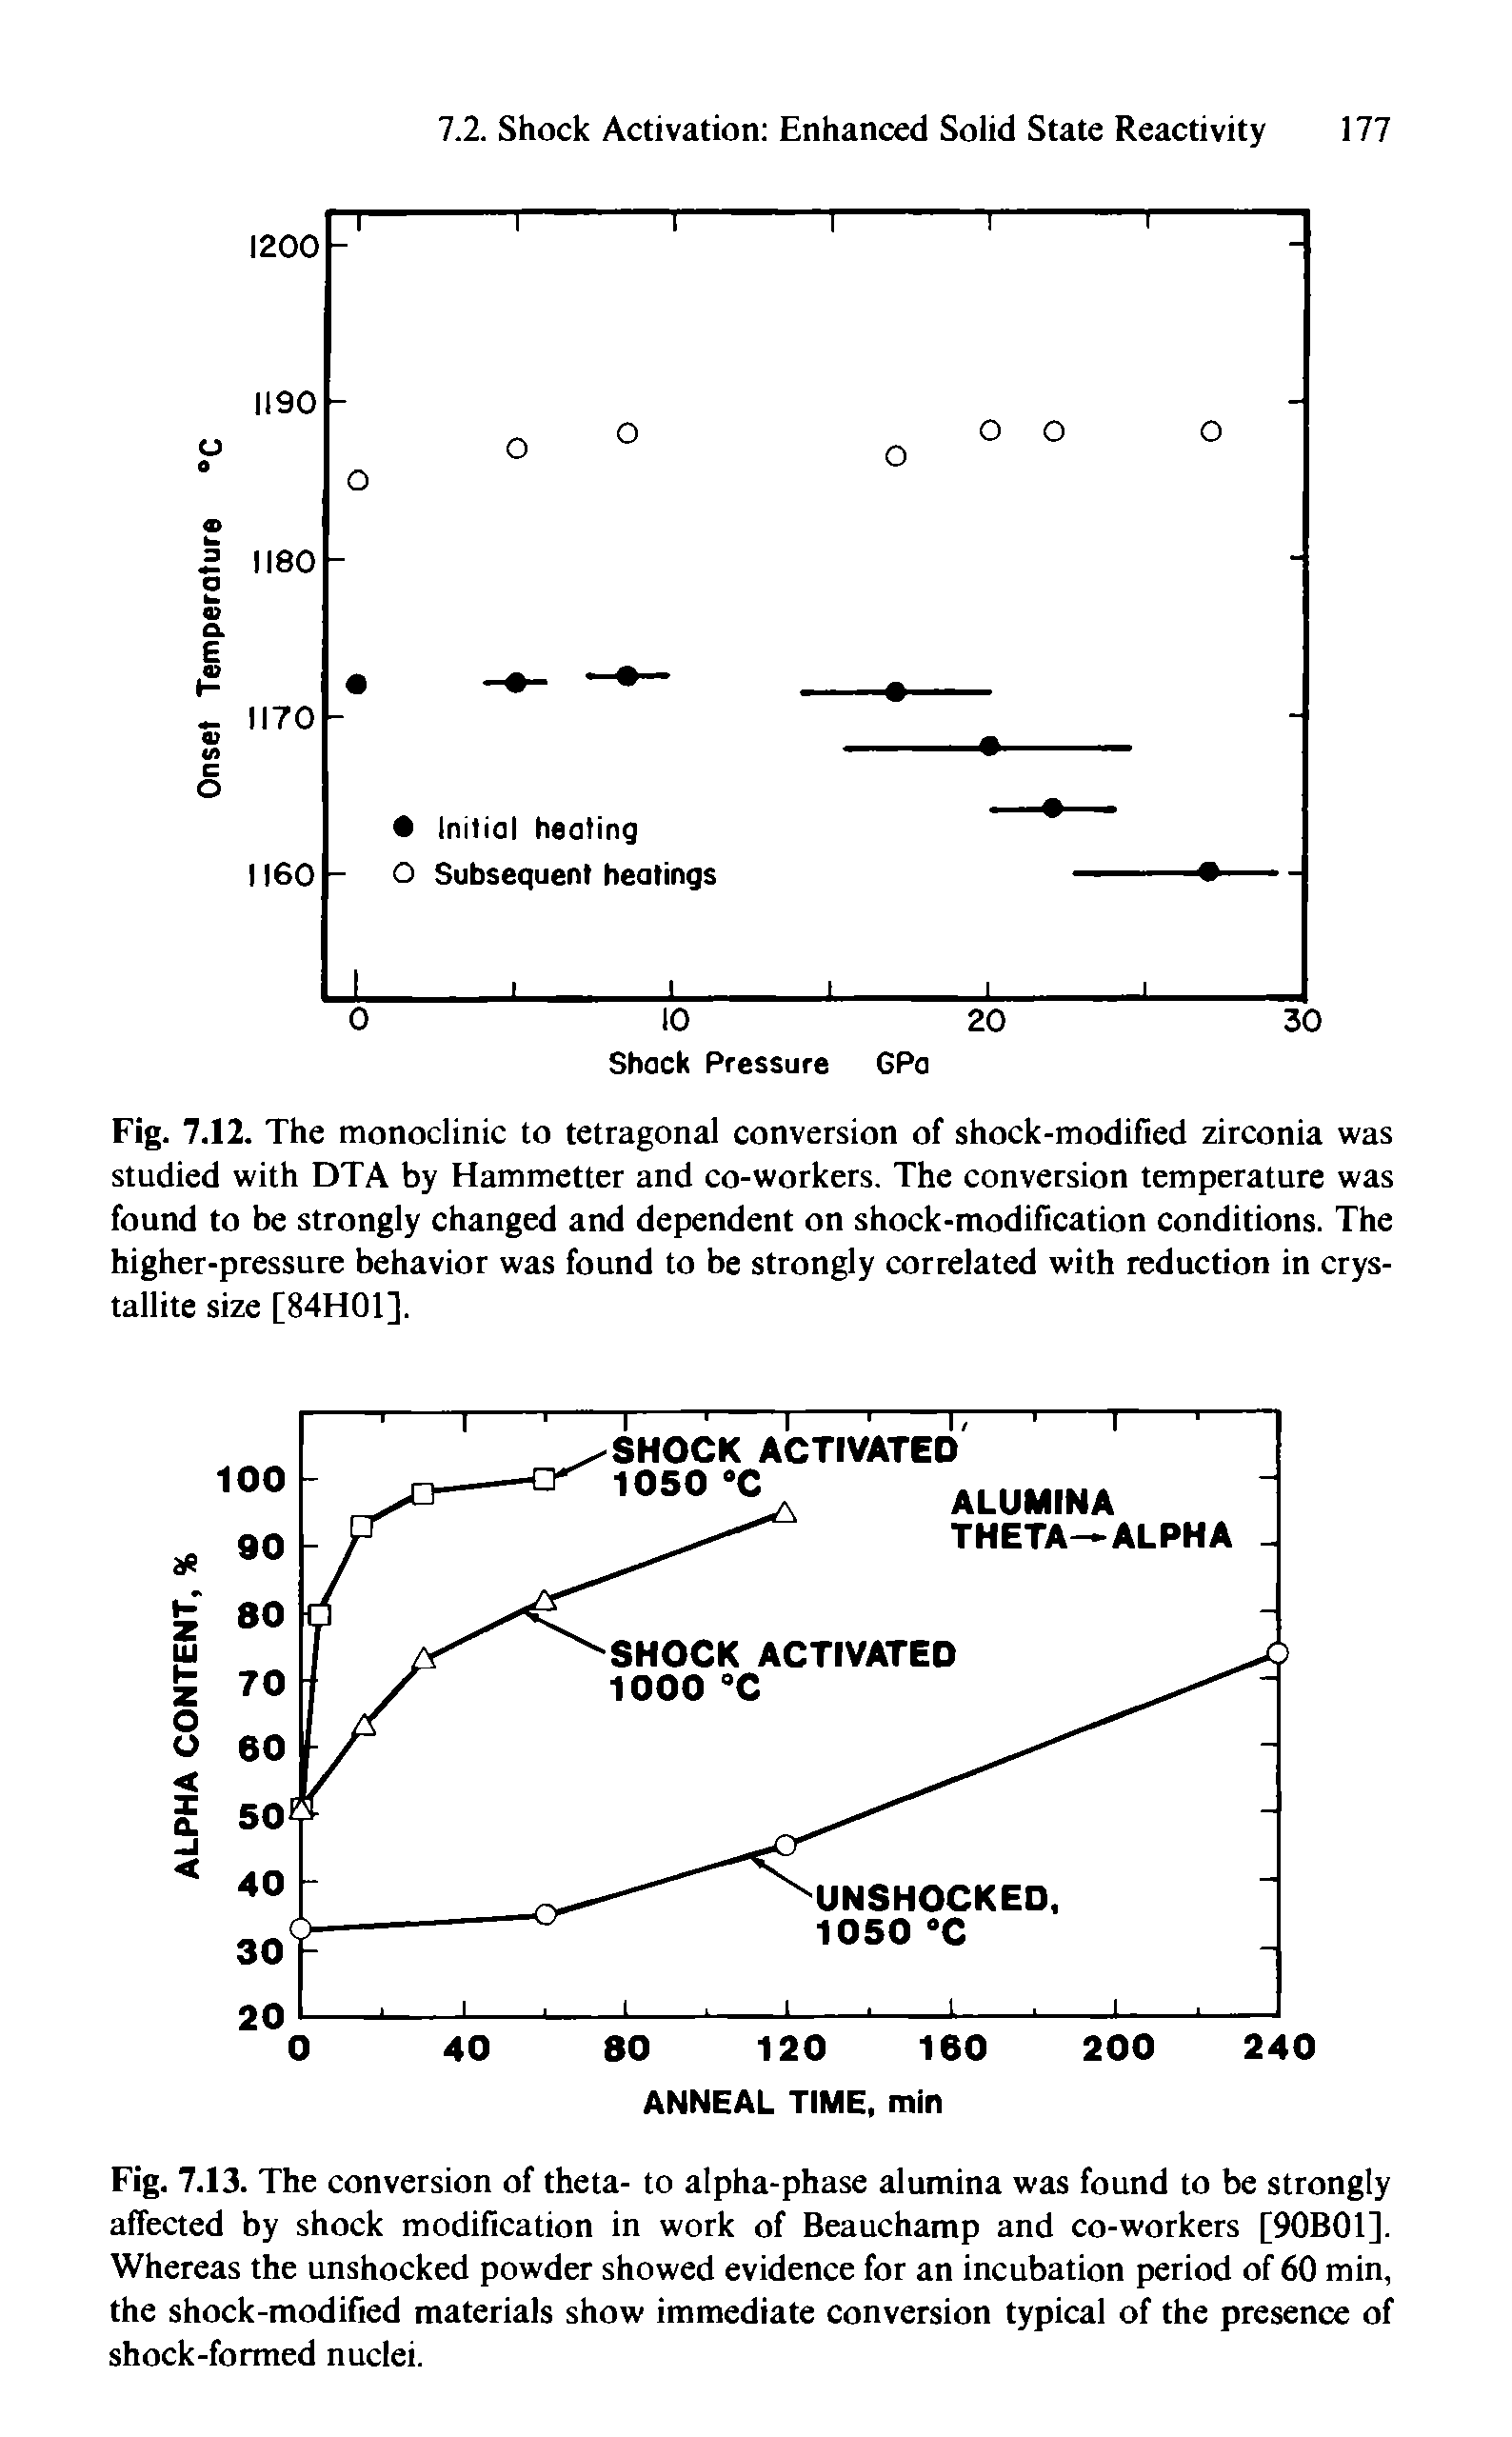 Fig. 7.12. The monoclinic to tetragonal conversion of shock-modified zirconia was studied with DTA by Hammetter and co-workers. The conversion temperature was found to be strongly changed and dependent on shock-modification conditions. The higher-pressure behavior was found to be strongly correlated with reduction in crystallite size [84H01],...